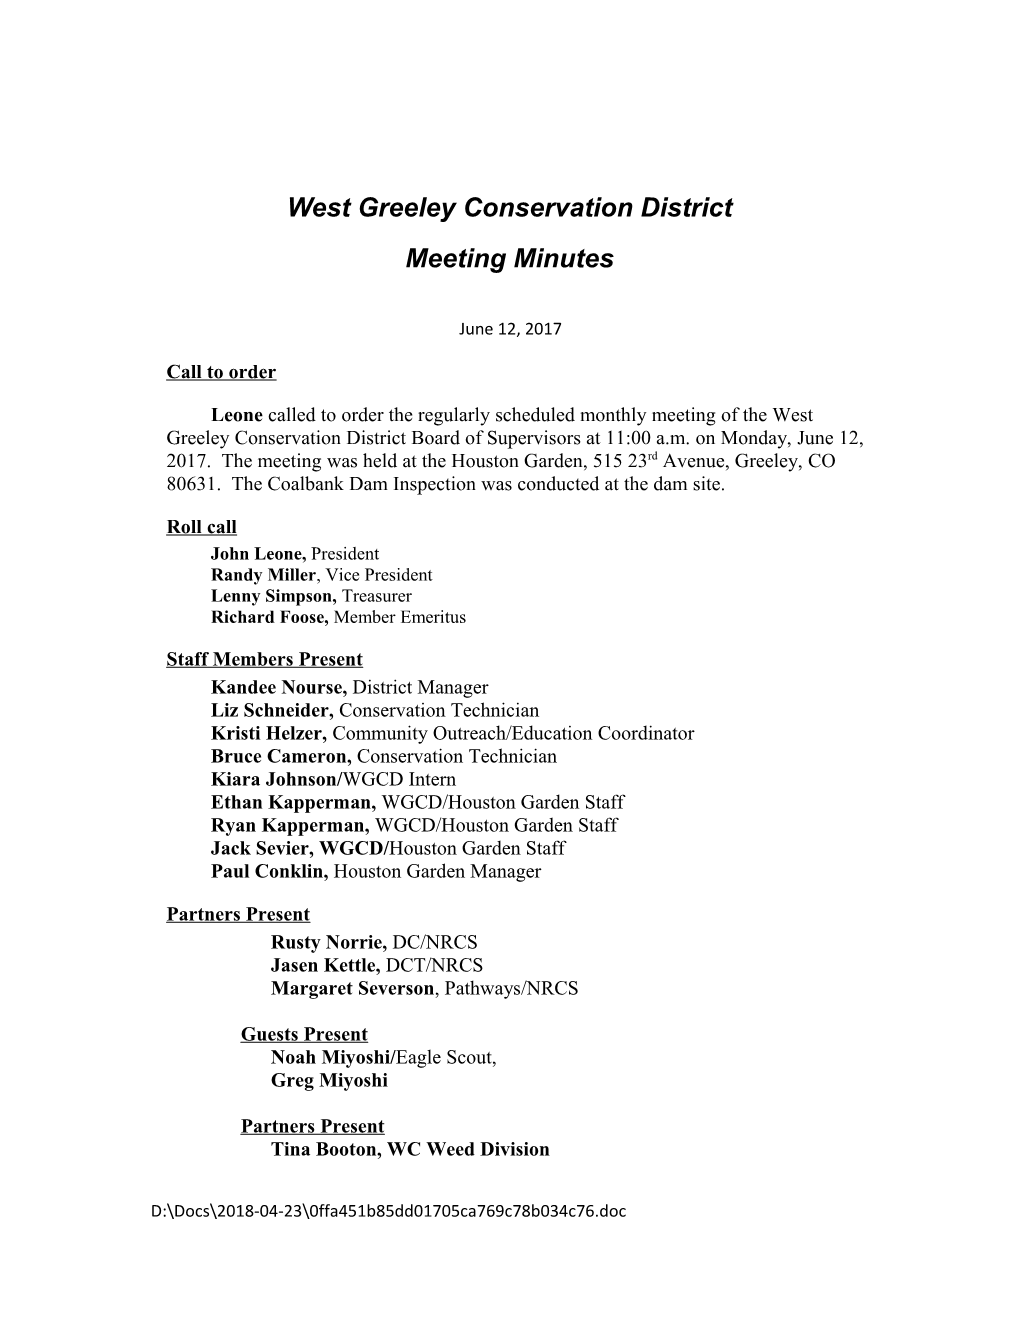 West Greeley Conservation District s2